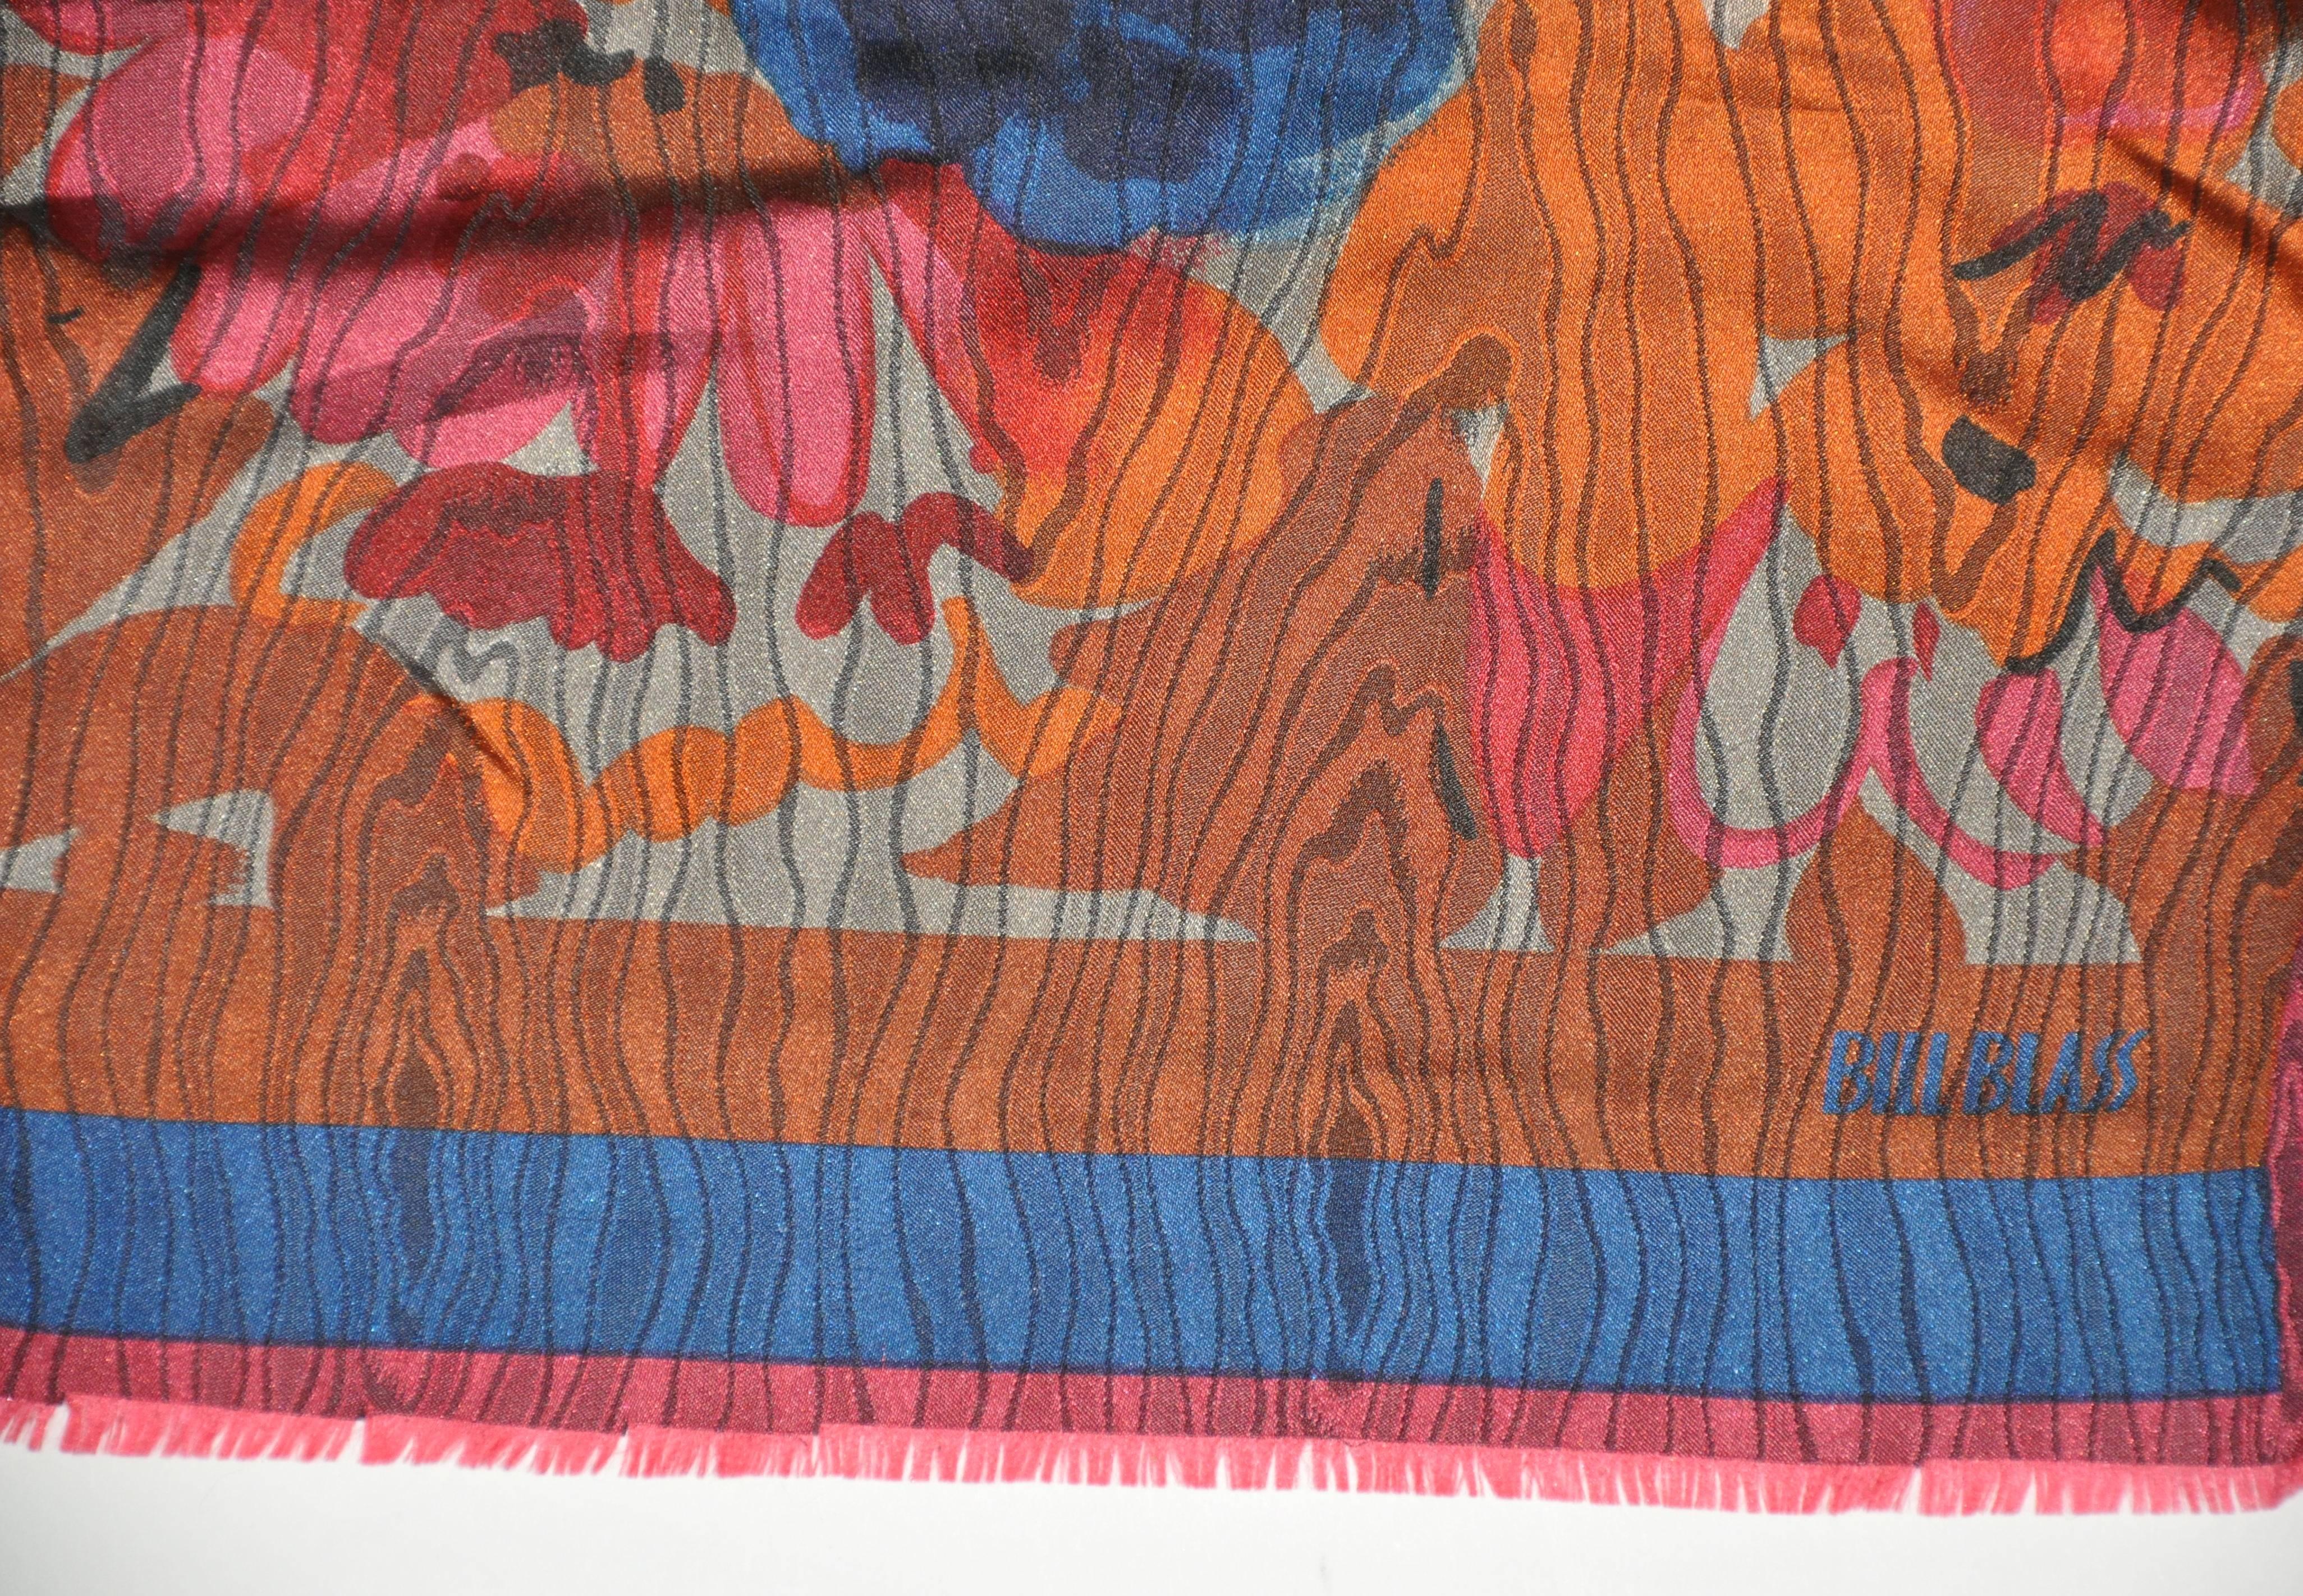  Bill Blass wonderful multi-colors of "Autumn Shades" floral silk scarf is accented with fringed edges and measures 11 1/2" x 59". Made in Japan.